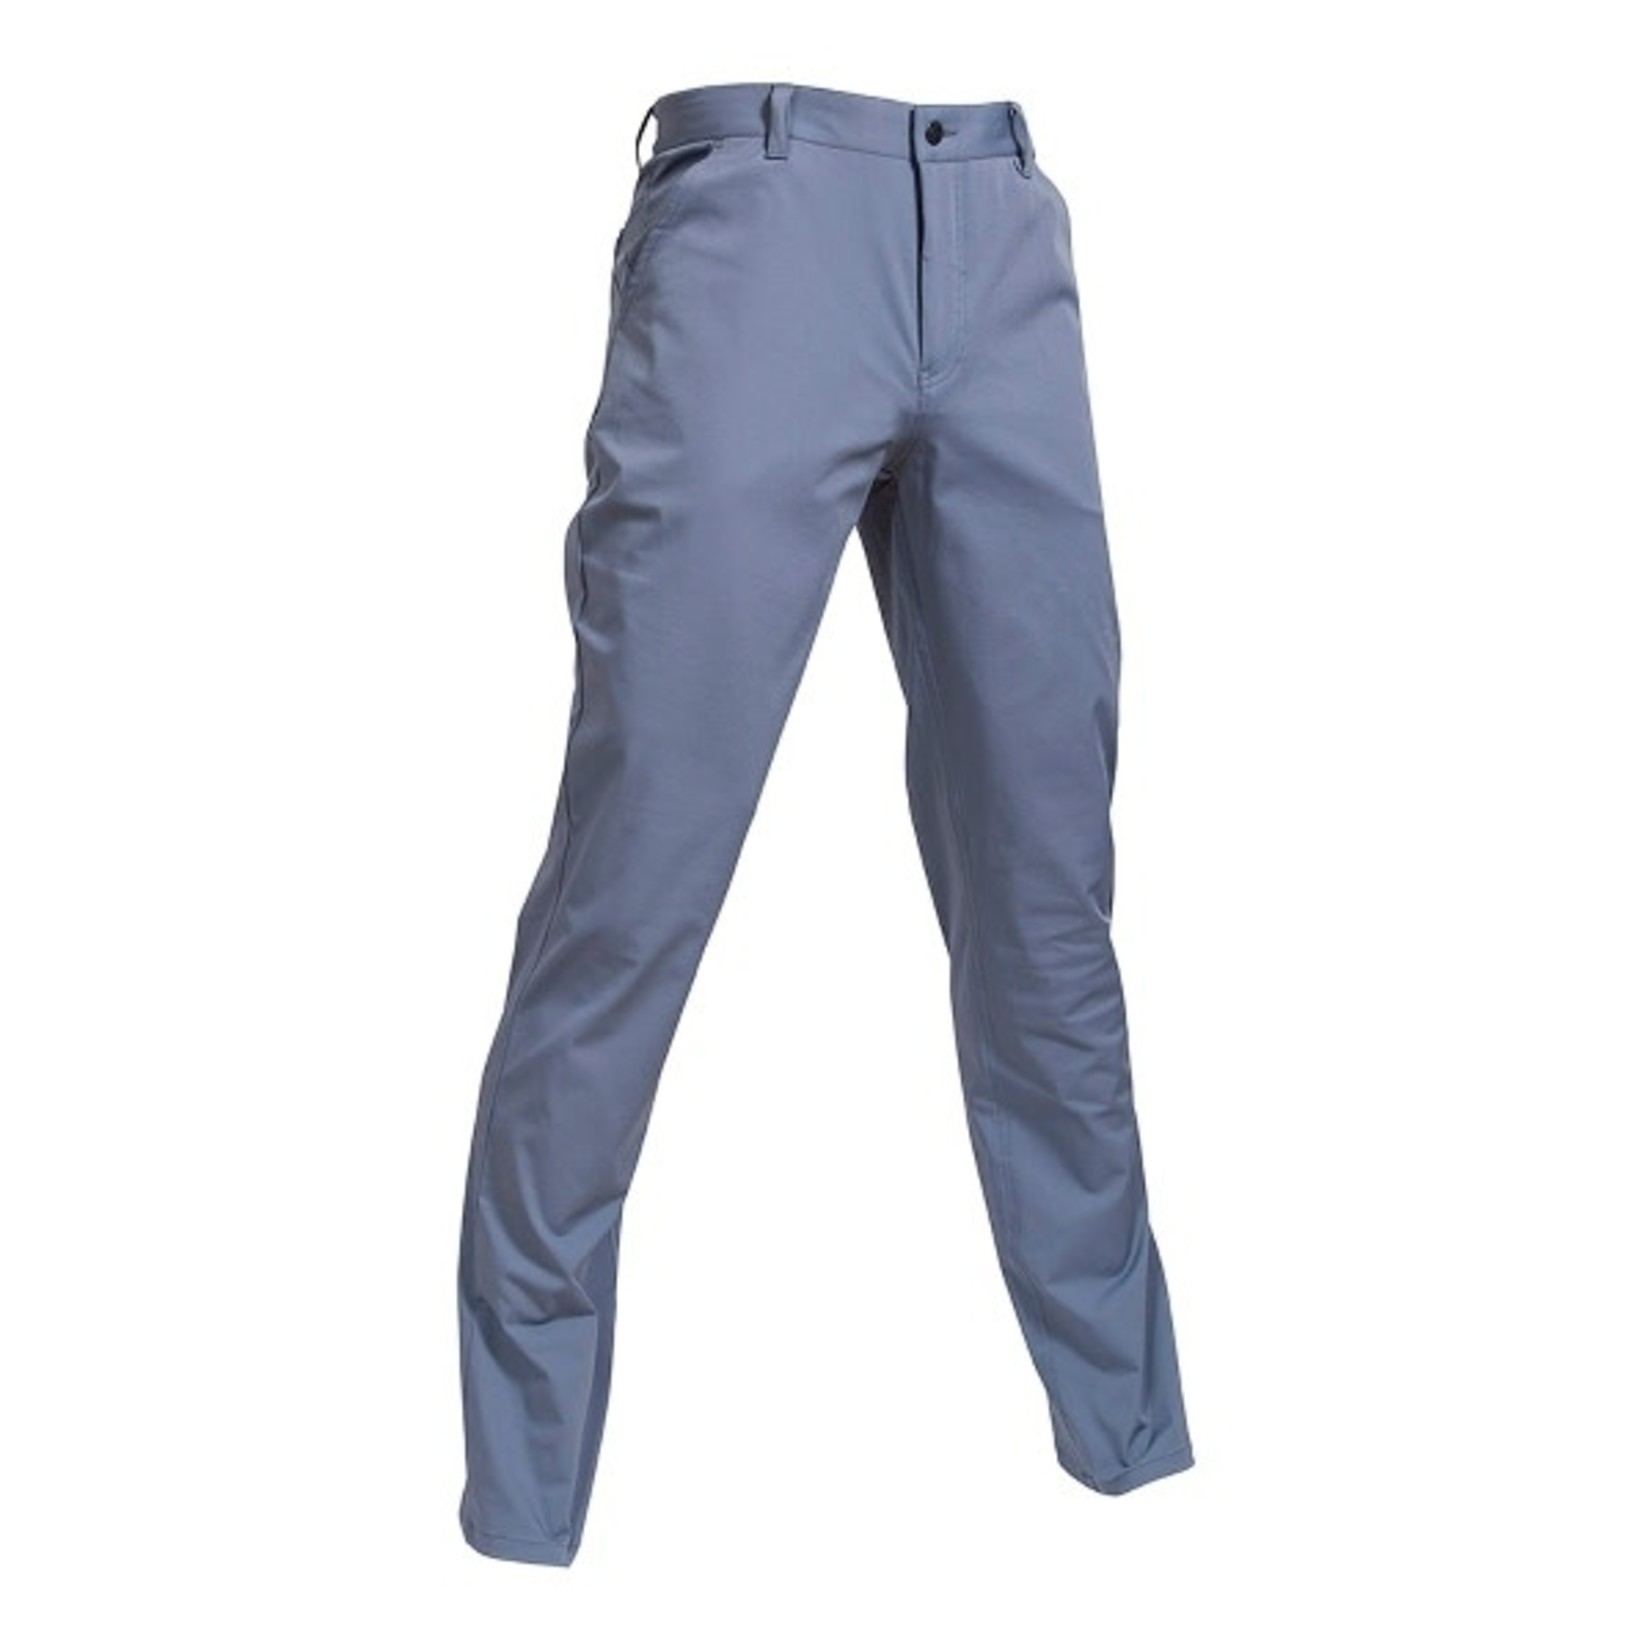 Backtee Backtee Mens High Perfor. Trousers Grey 56 lengte 31"